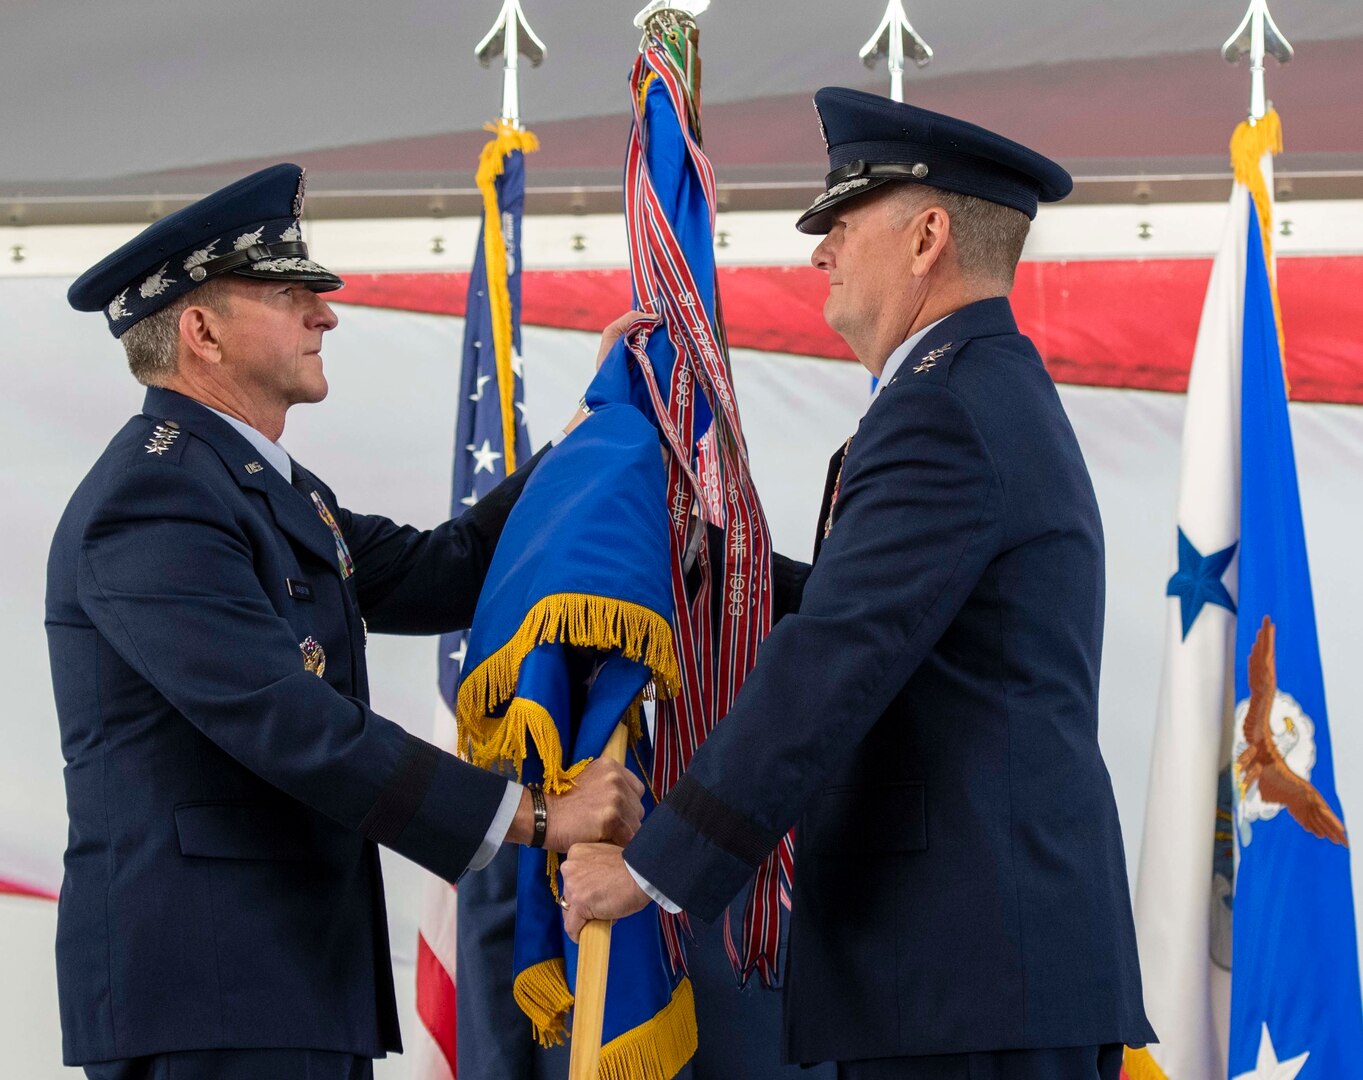 U.S. Air Force Chief of Staff Gen. David L. Goldfein presents the Air Education and Training Command guidon to Lt. Gen. Brad Webb, new commander of AETC, during a change of command ceremony at Joint Base San Antonio-Randolph July 26. Webb, a 1984 graduate of the U.S. Air Force Academy, is a command pilot with more than 3,700 flying hours, including 117 combat hours in Afghanistan, Iraq and Bosnia.